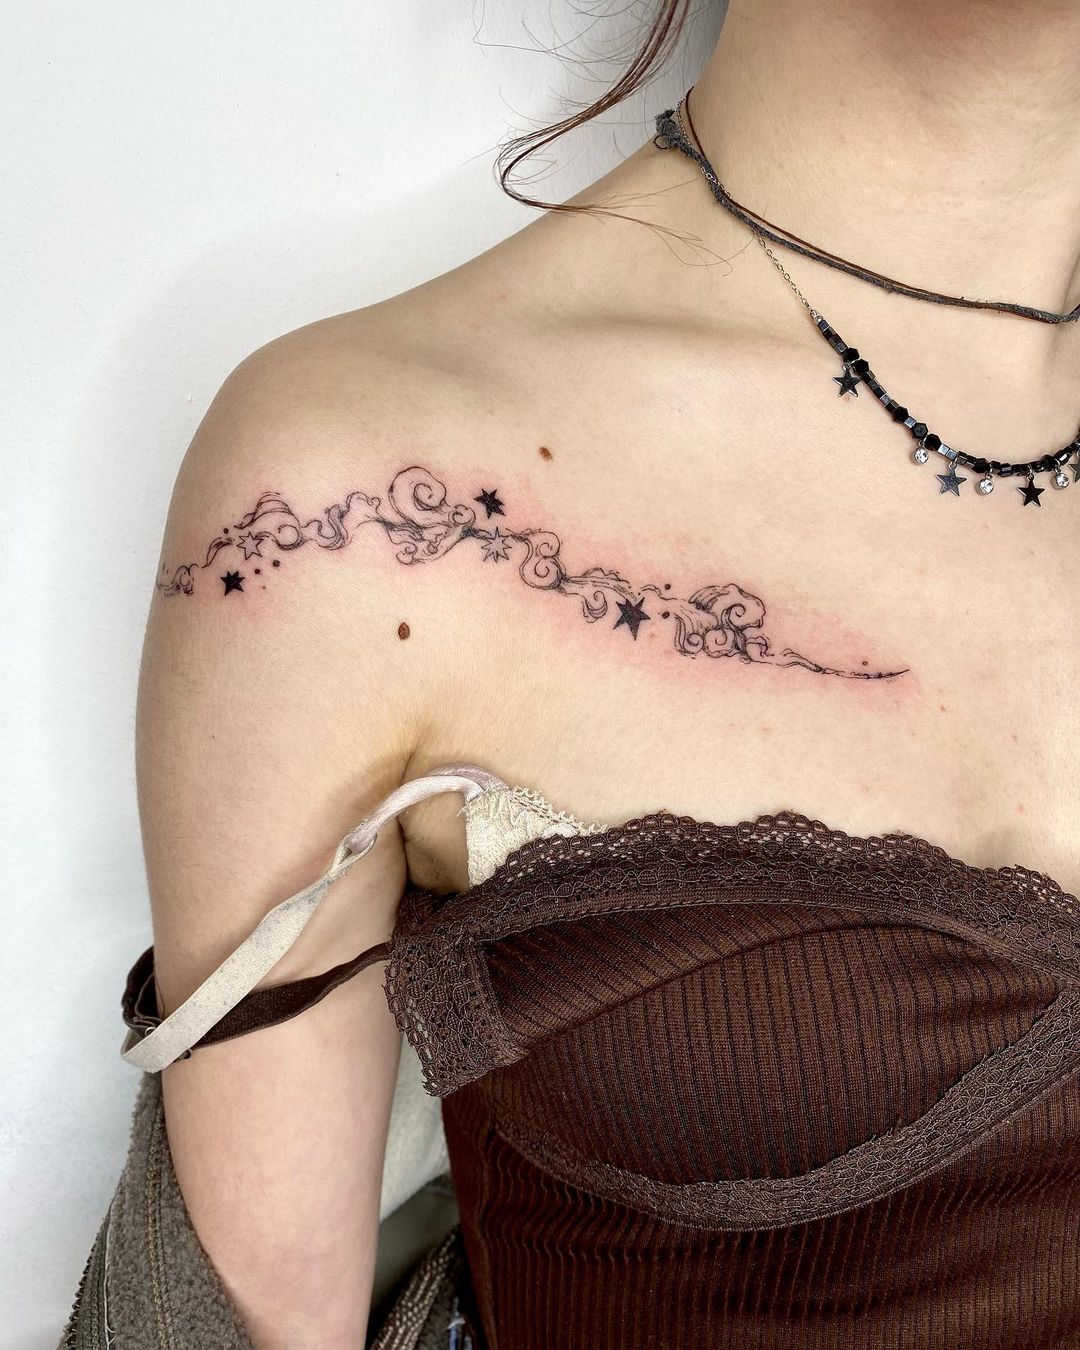 50 Awesome Breast Tattoo Designs, Styles At Life